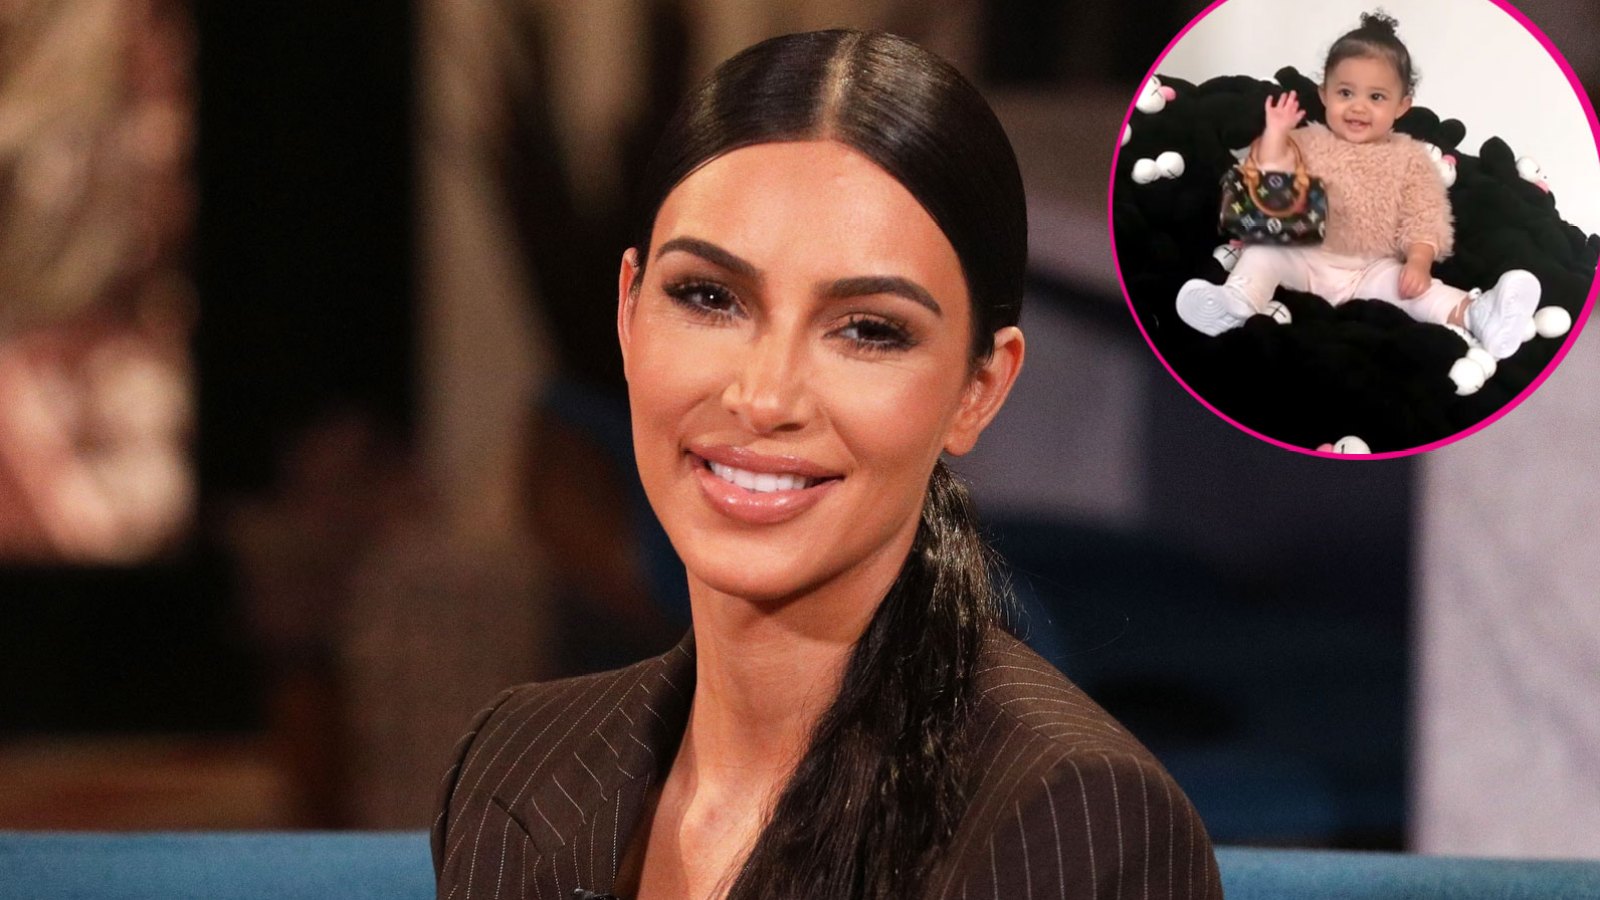 Kim Kardashian Bought Designer Bags for All the Babies in the Family — and Stormi Webster Is Obsessed!